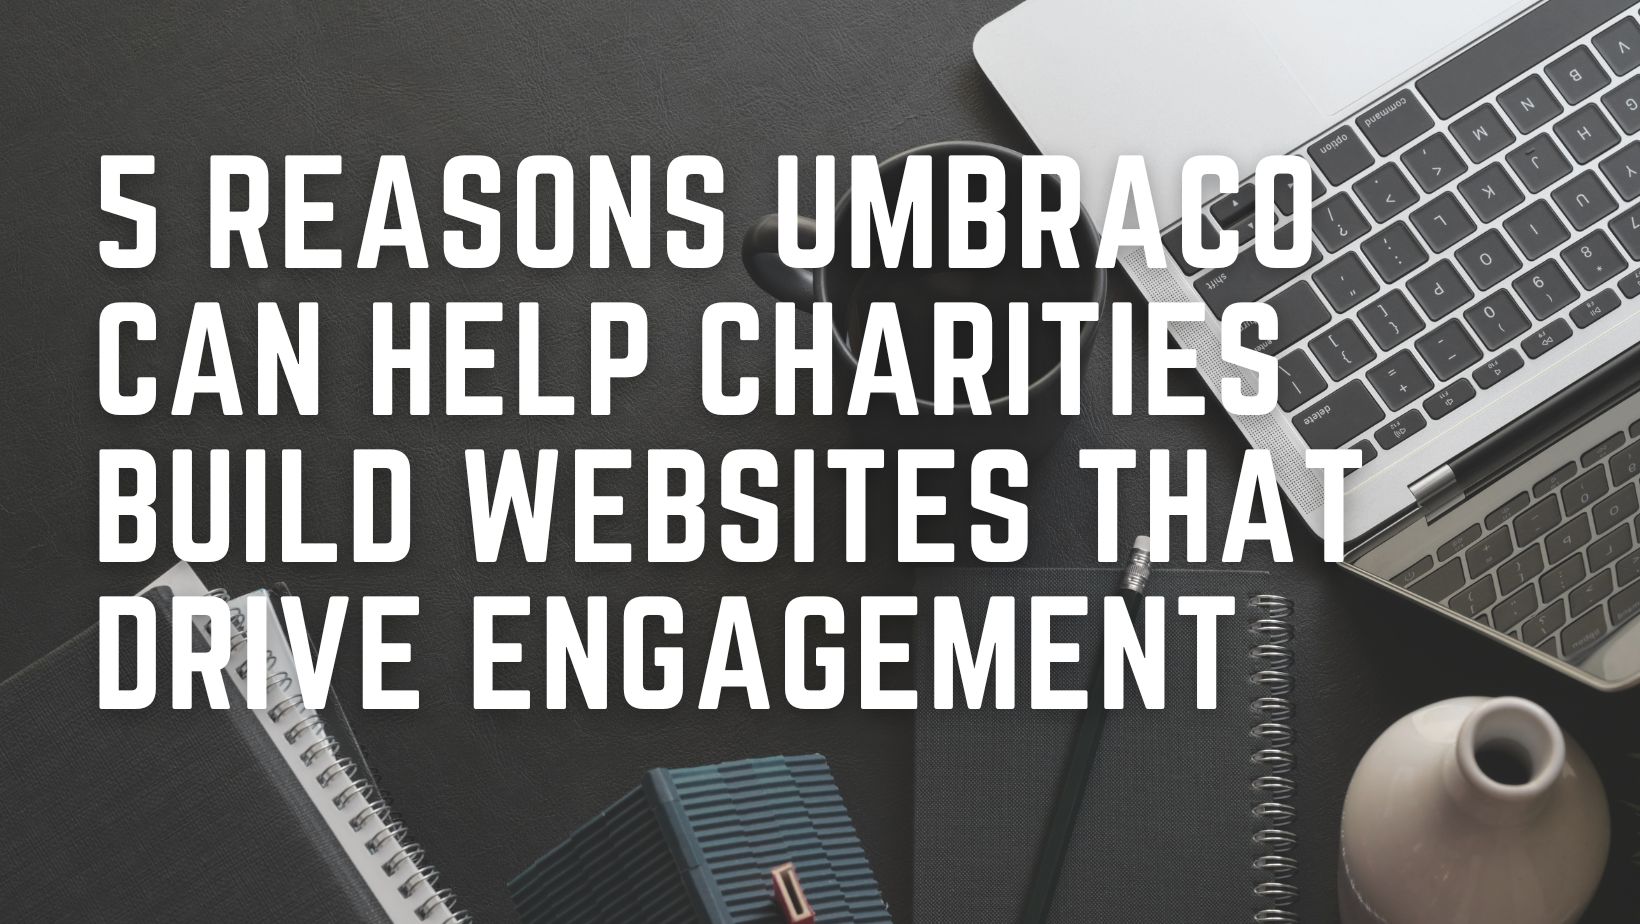 5 Ways Umbraco Can Help Charities Build Effective Websites That Drive Engagement and Achieve Their Mission